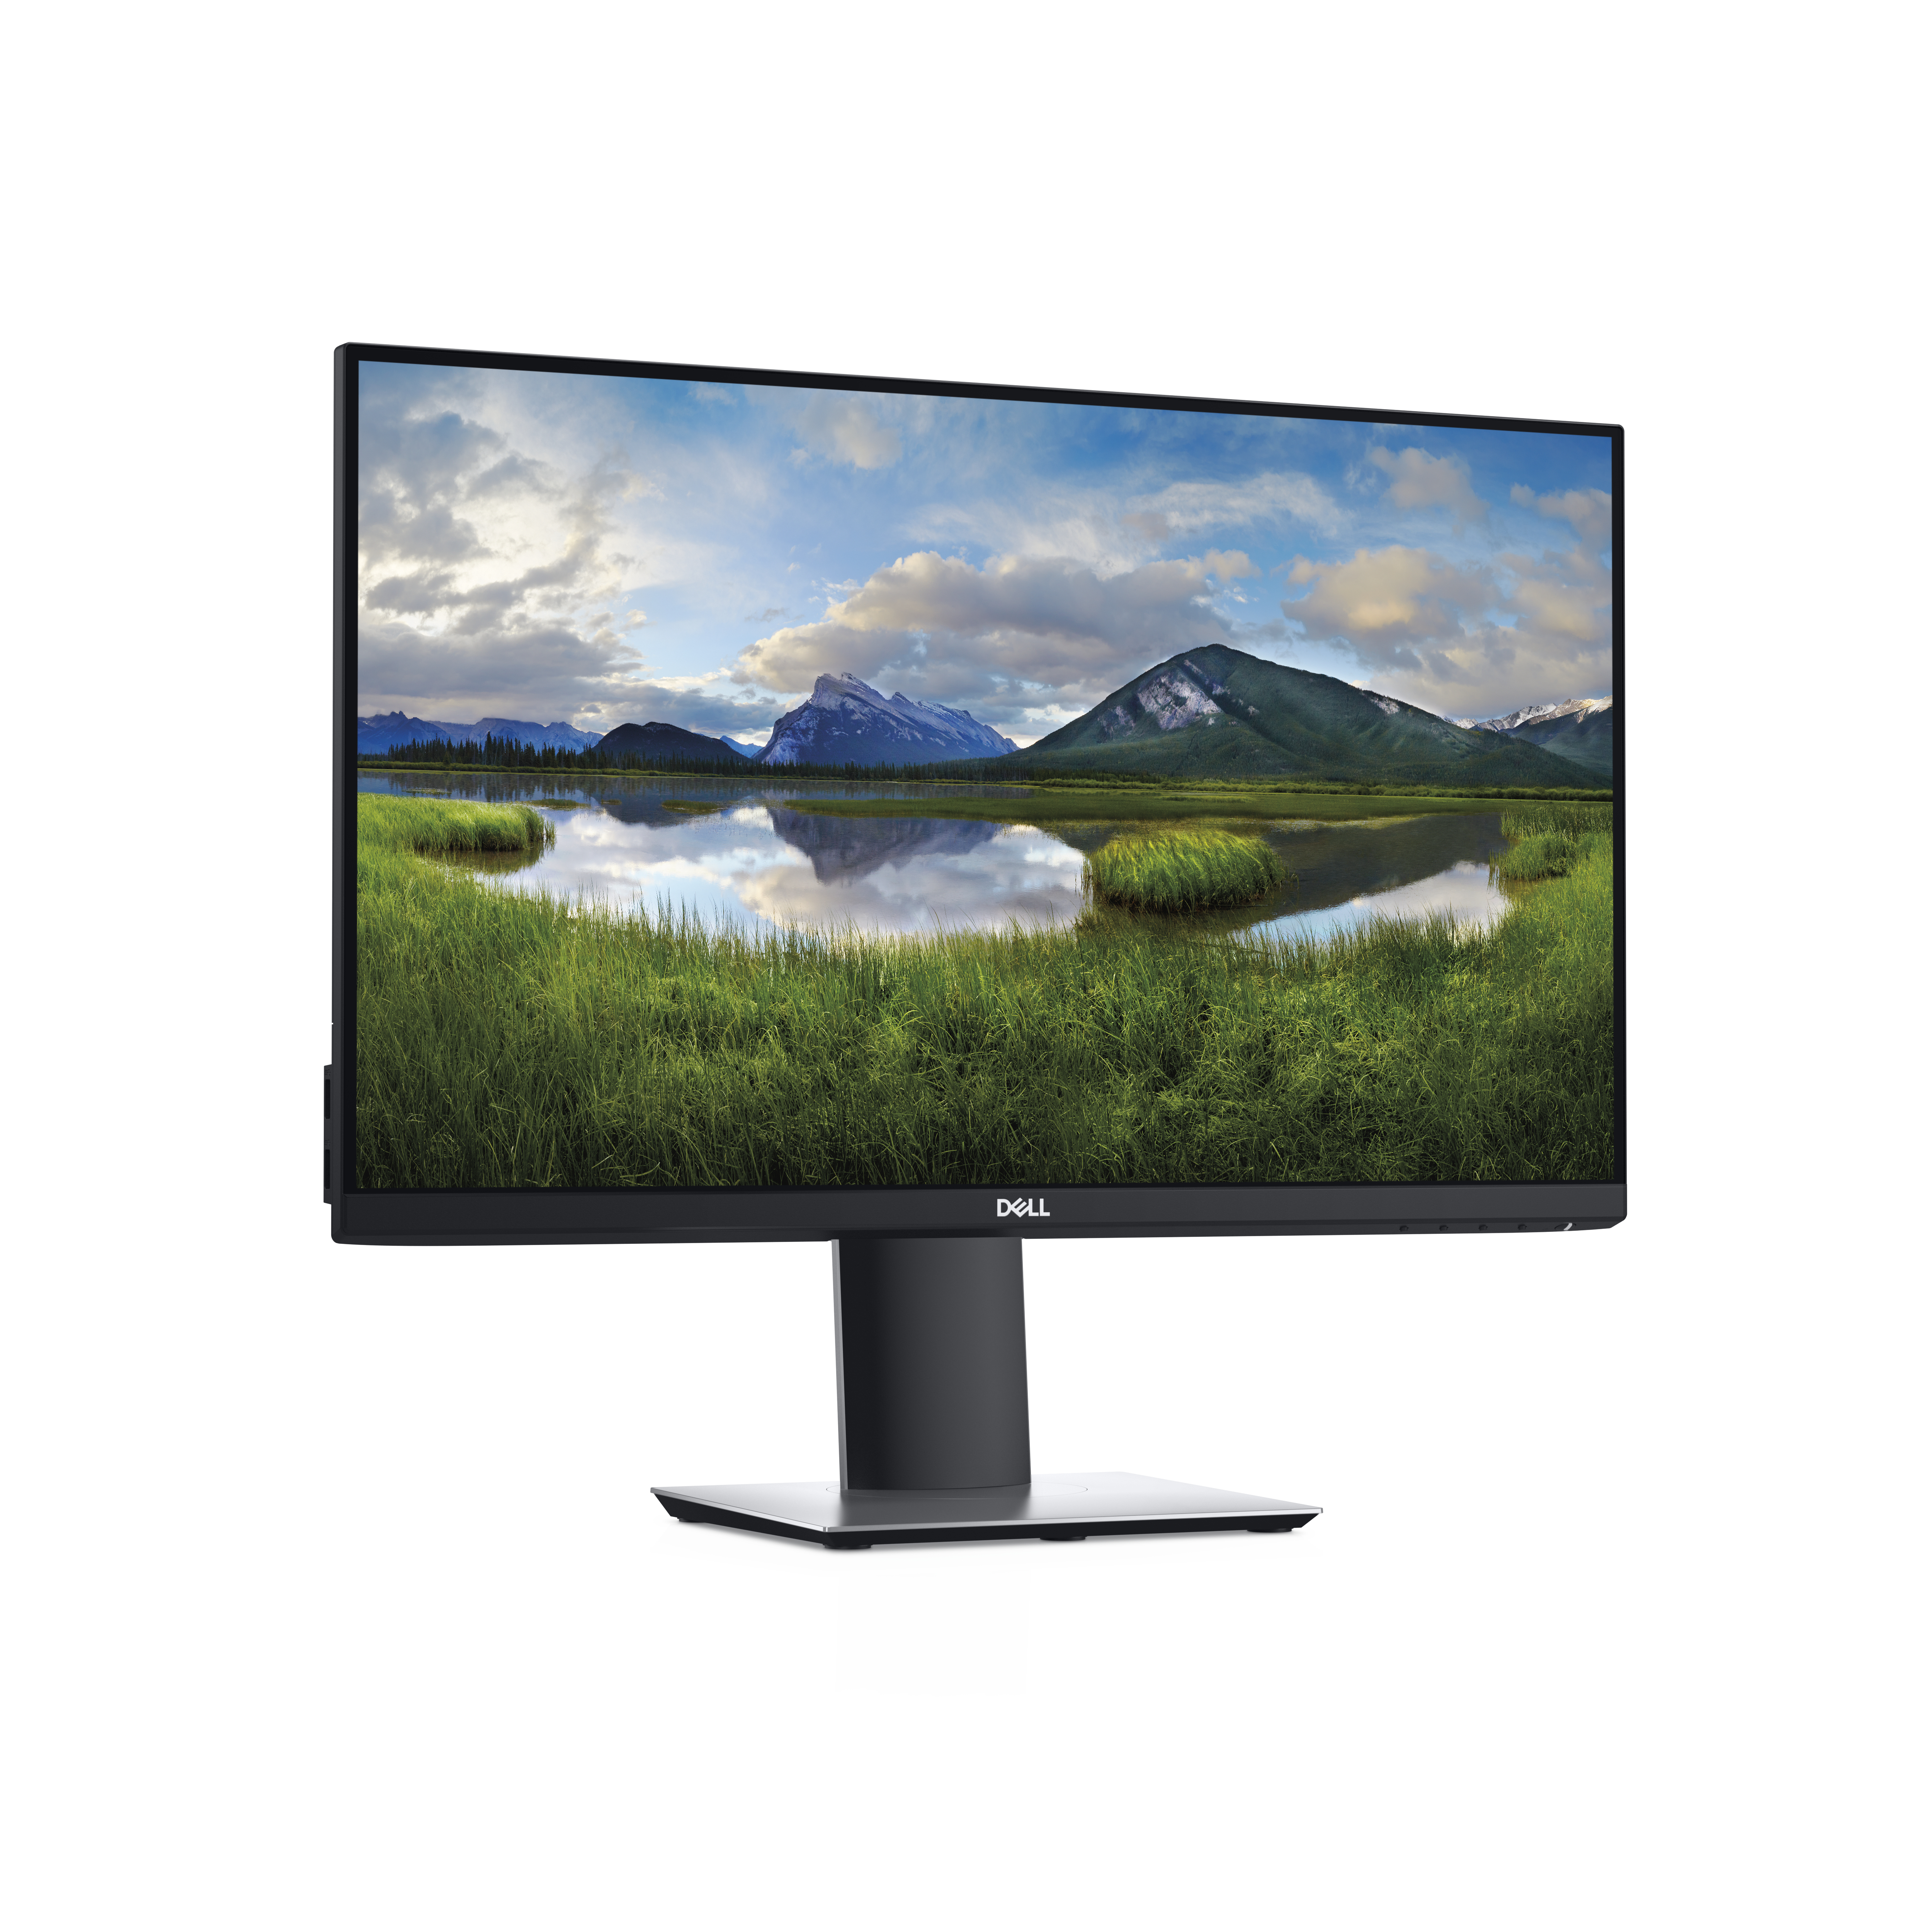 Monitor DELL P2419H LED display 61 cm (24